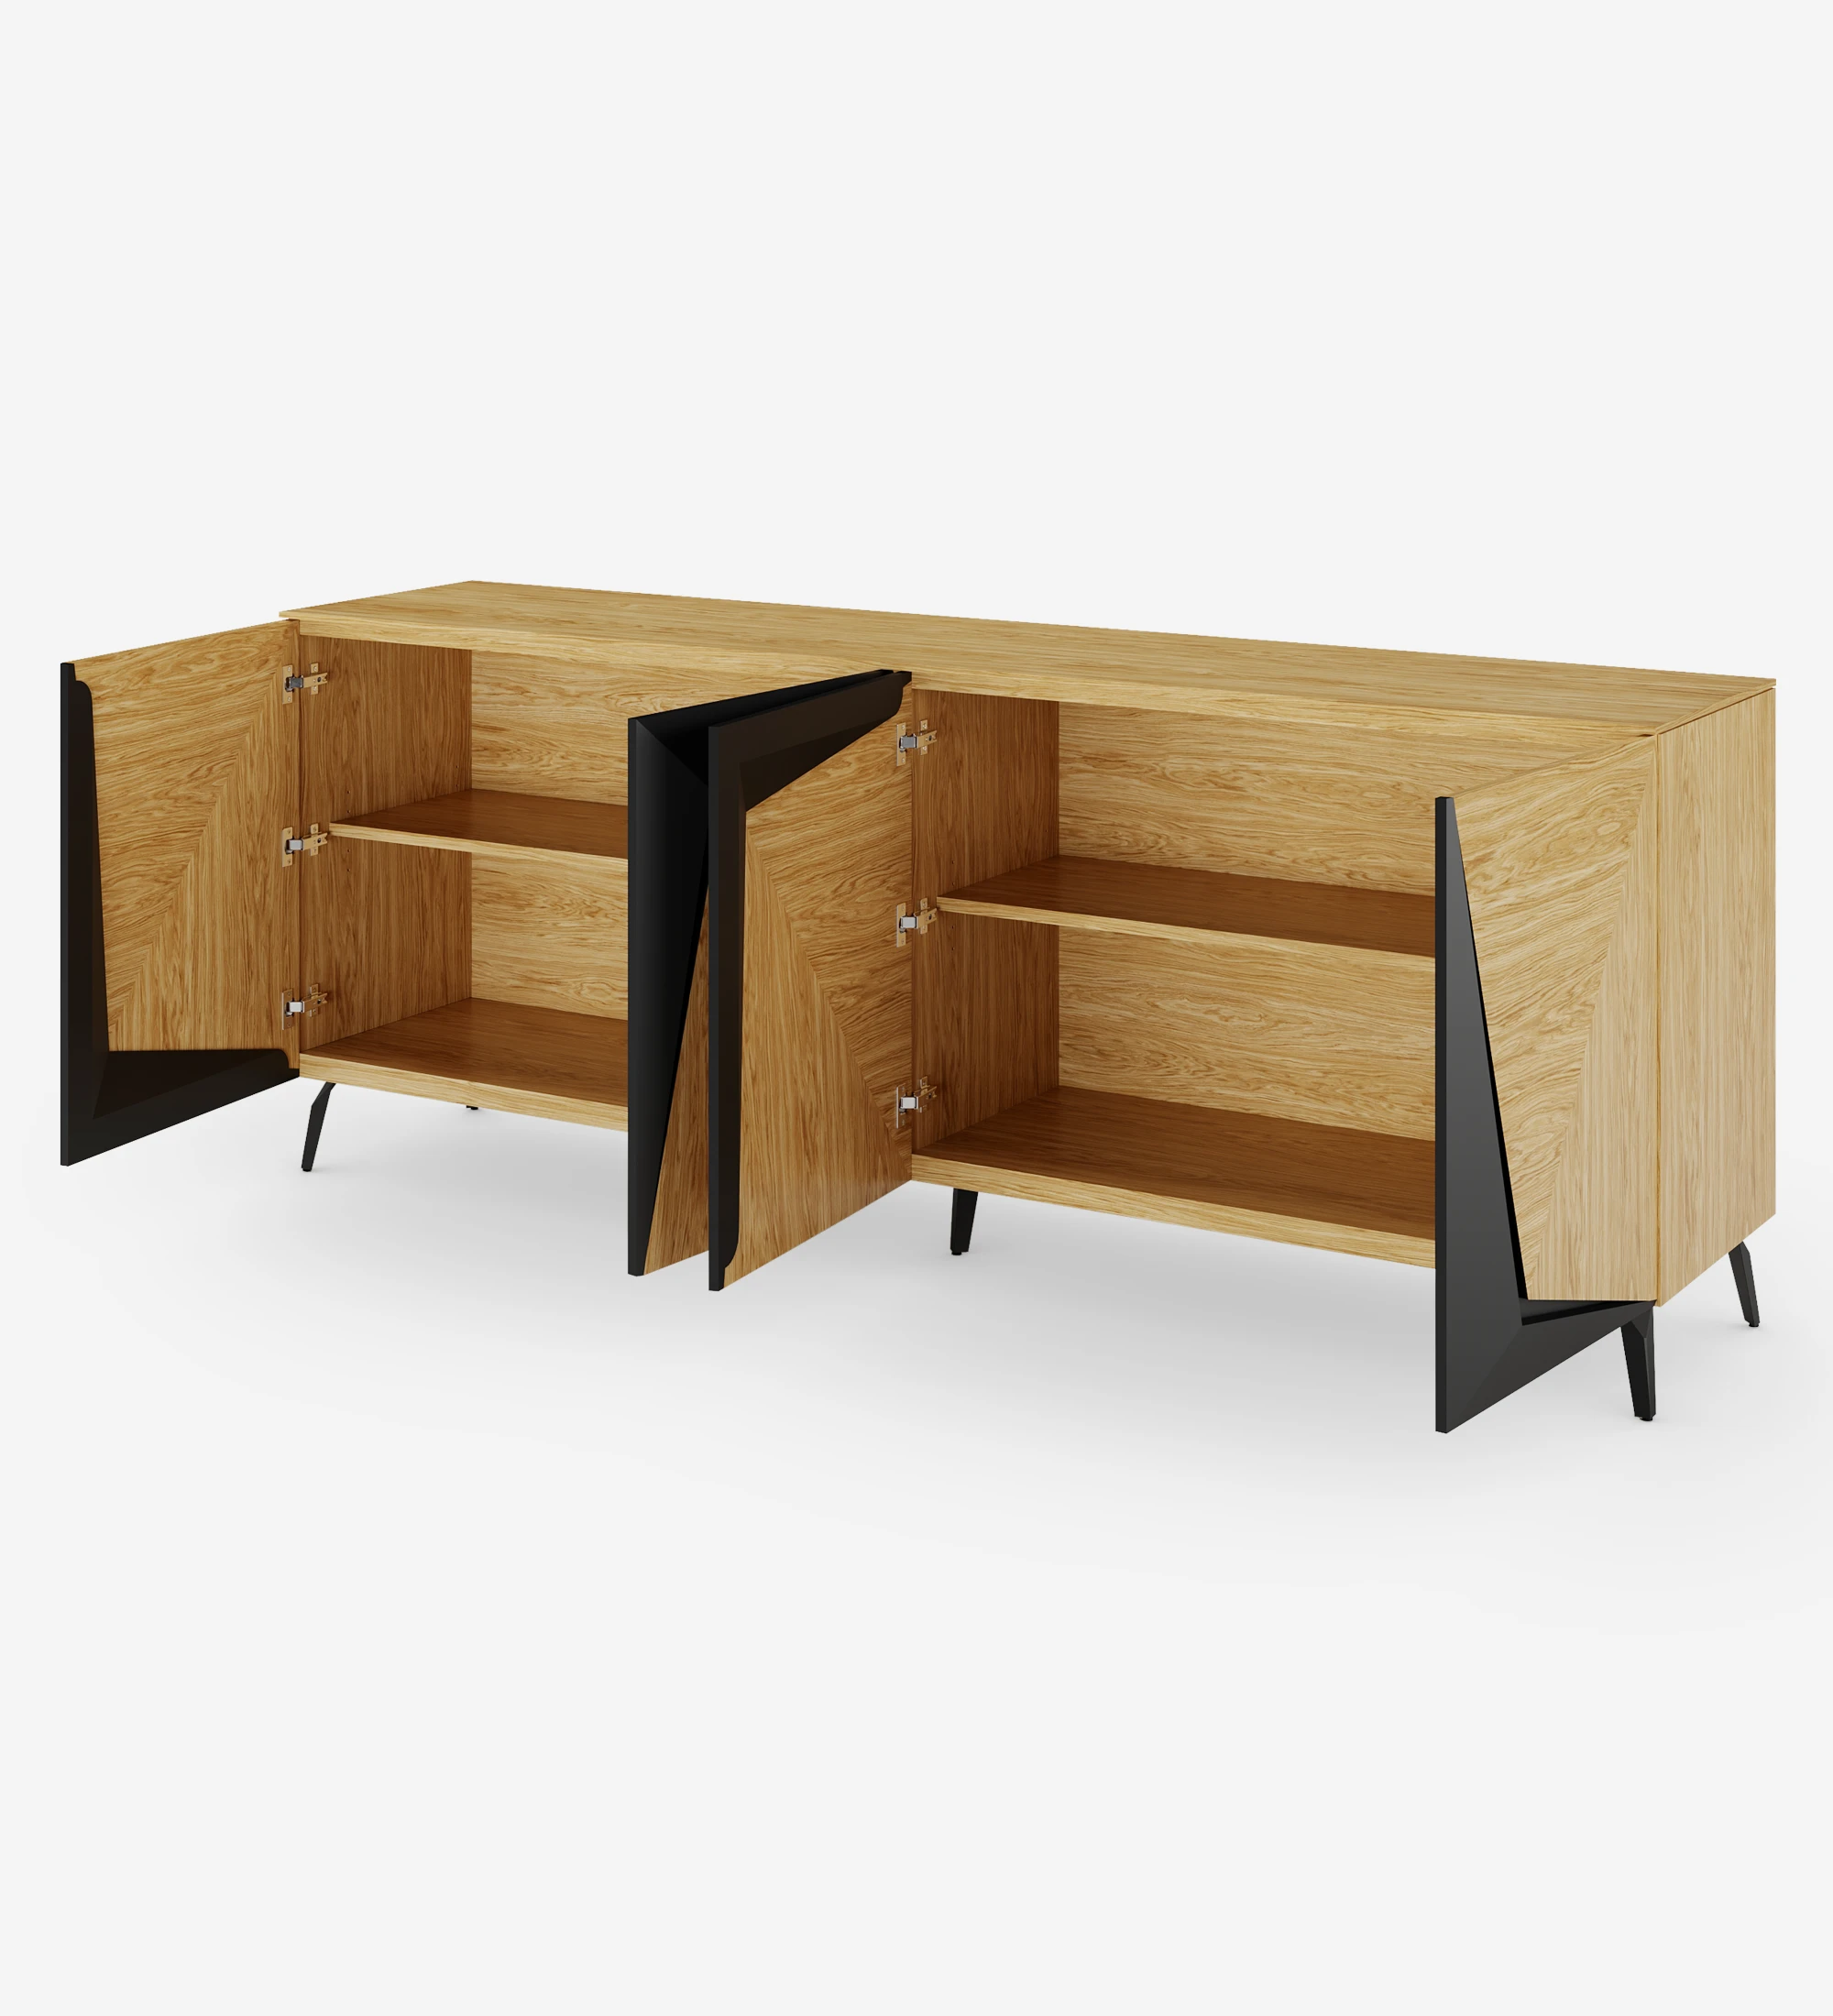 Sideboard with 4 doors in natural oak with black details, with natural oak structure and black lacquered metal base.